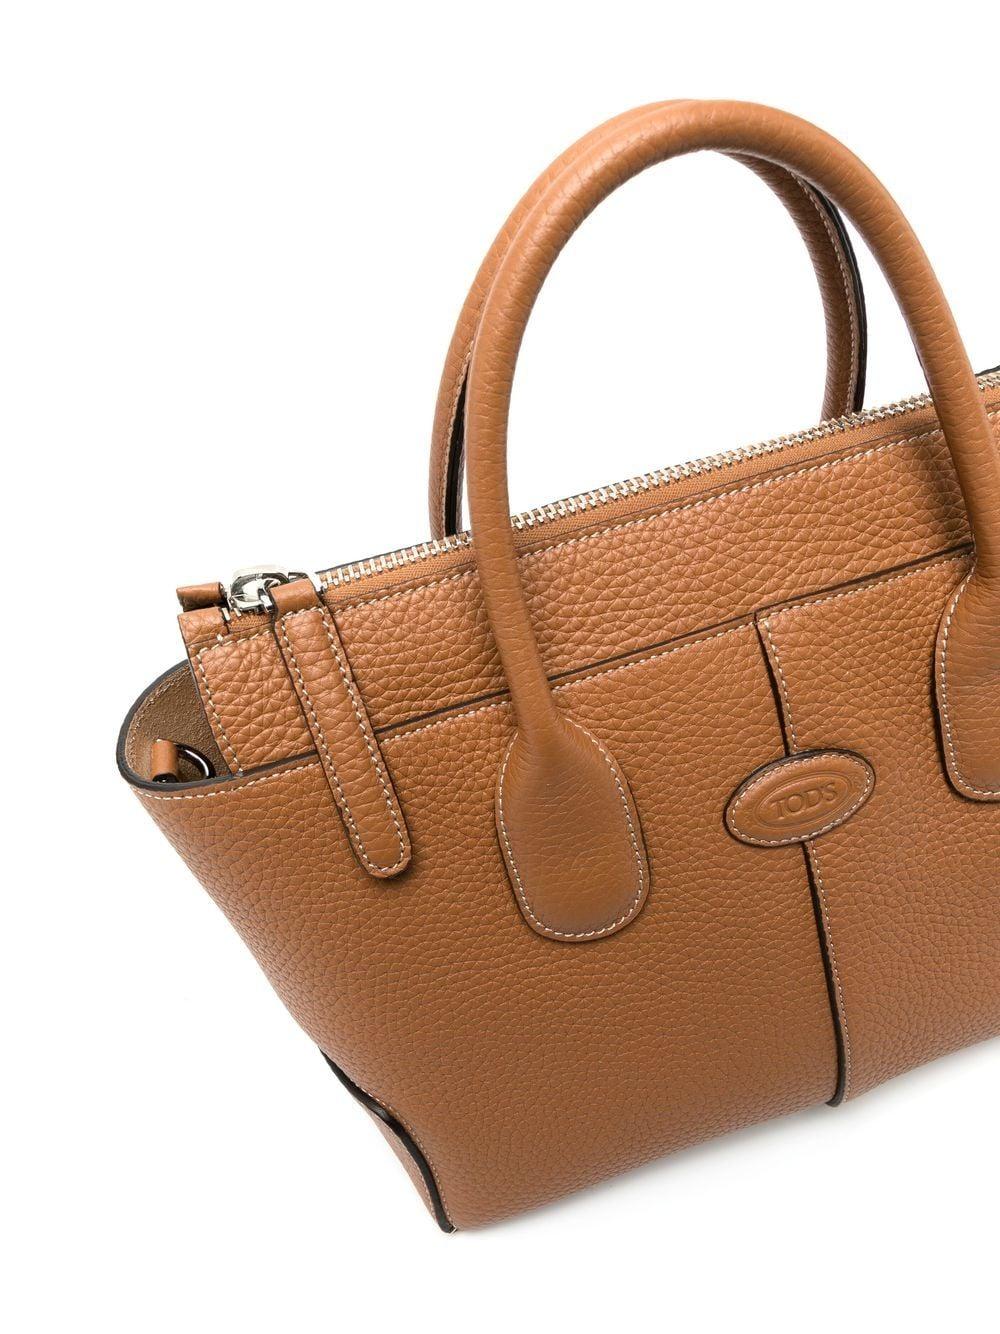 Tod's Leather Tote Bag in Brown | Lyst